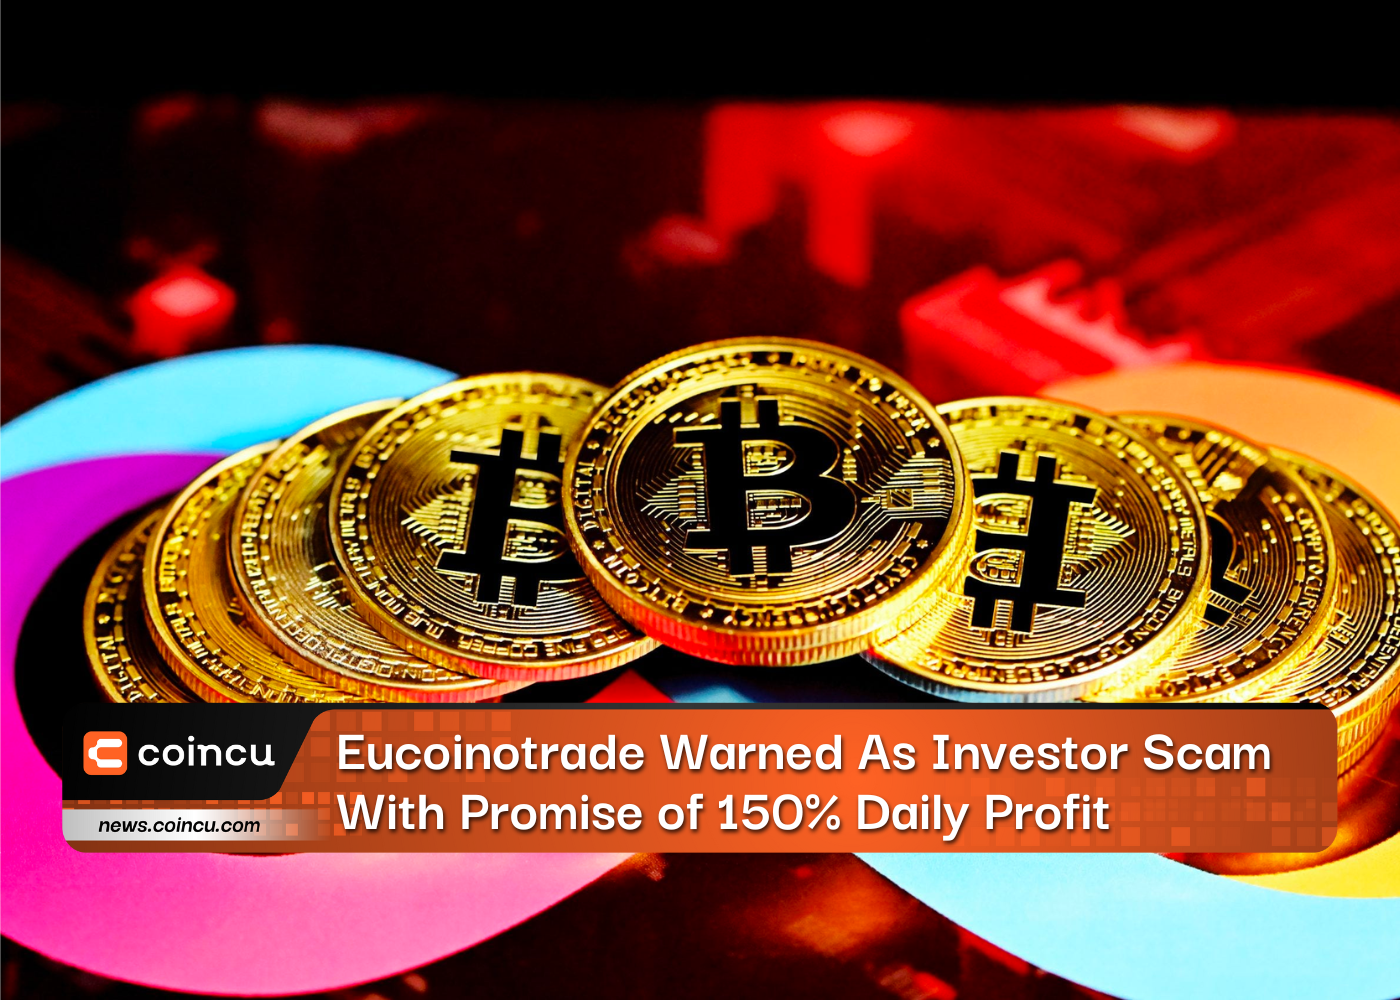 Eucoinotrade Warned As Investor Scam With Promise of 150% Daily Profit